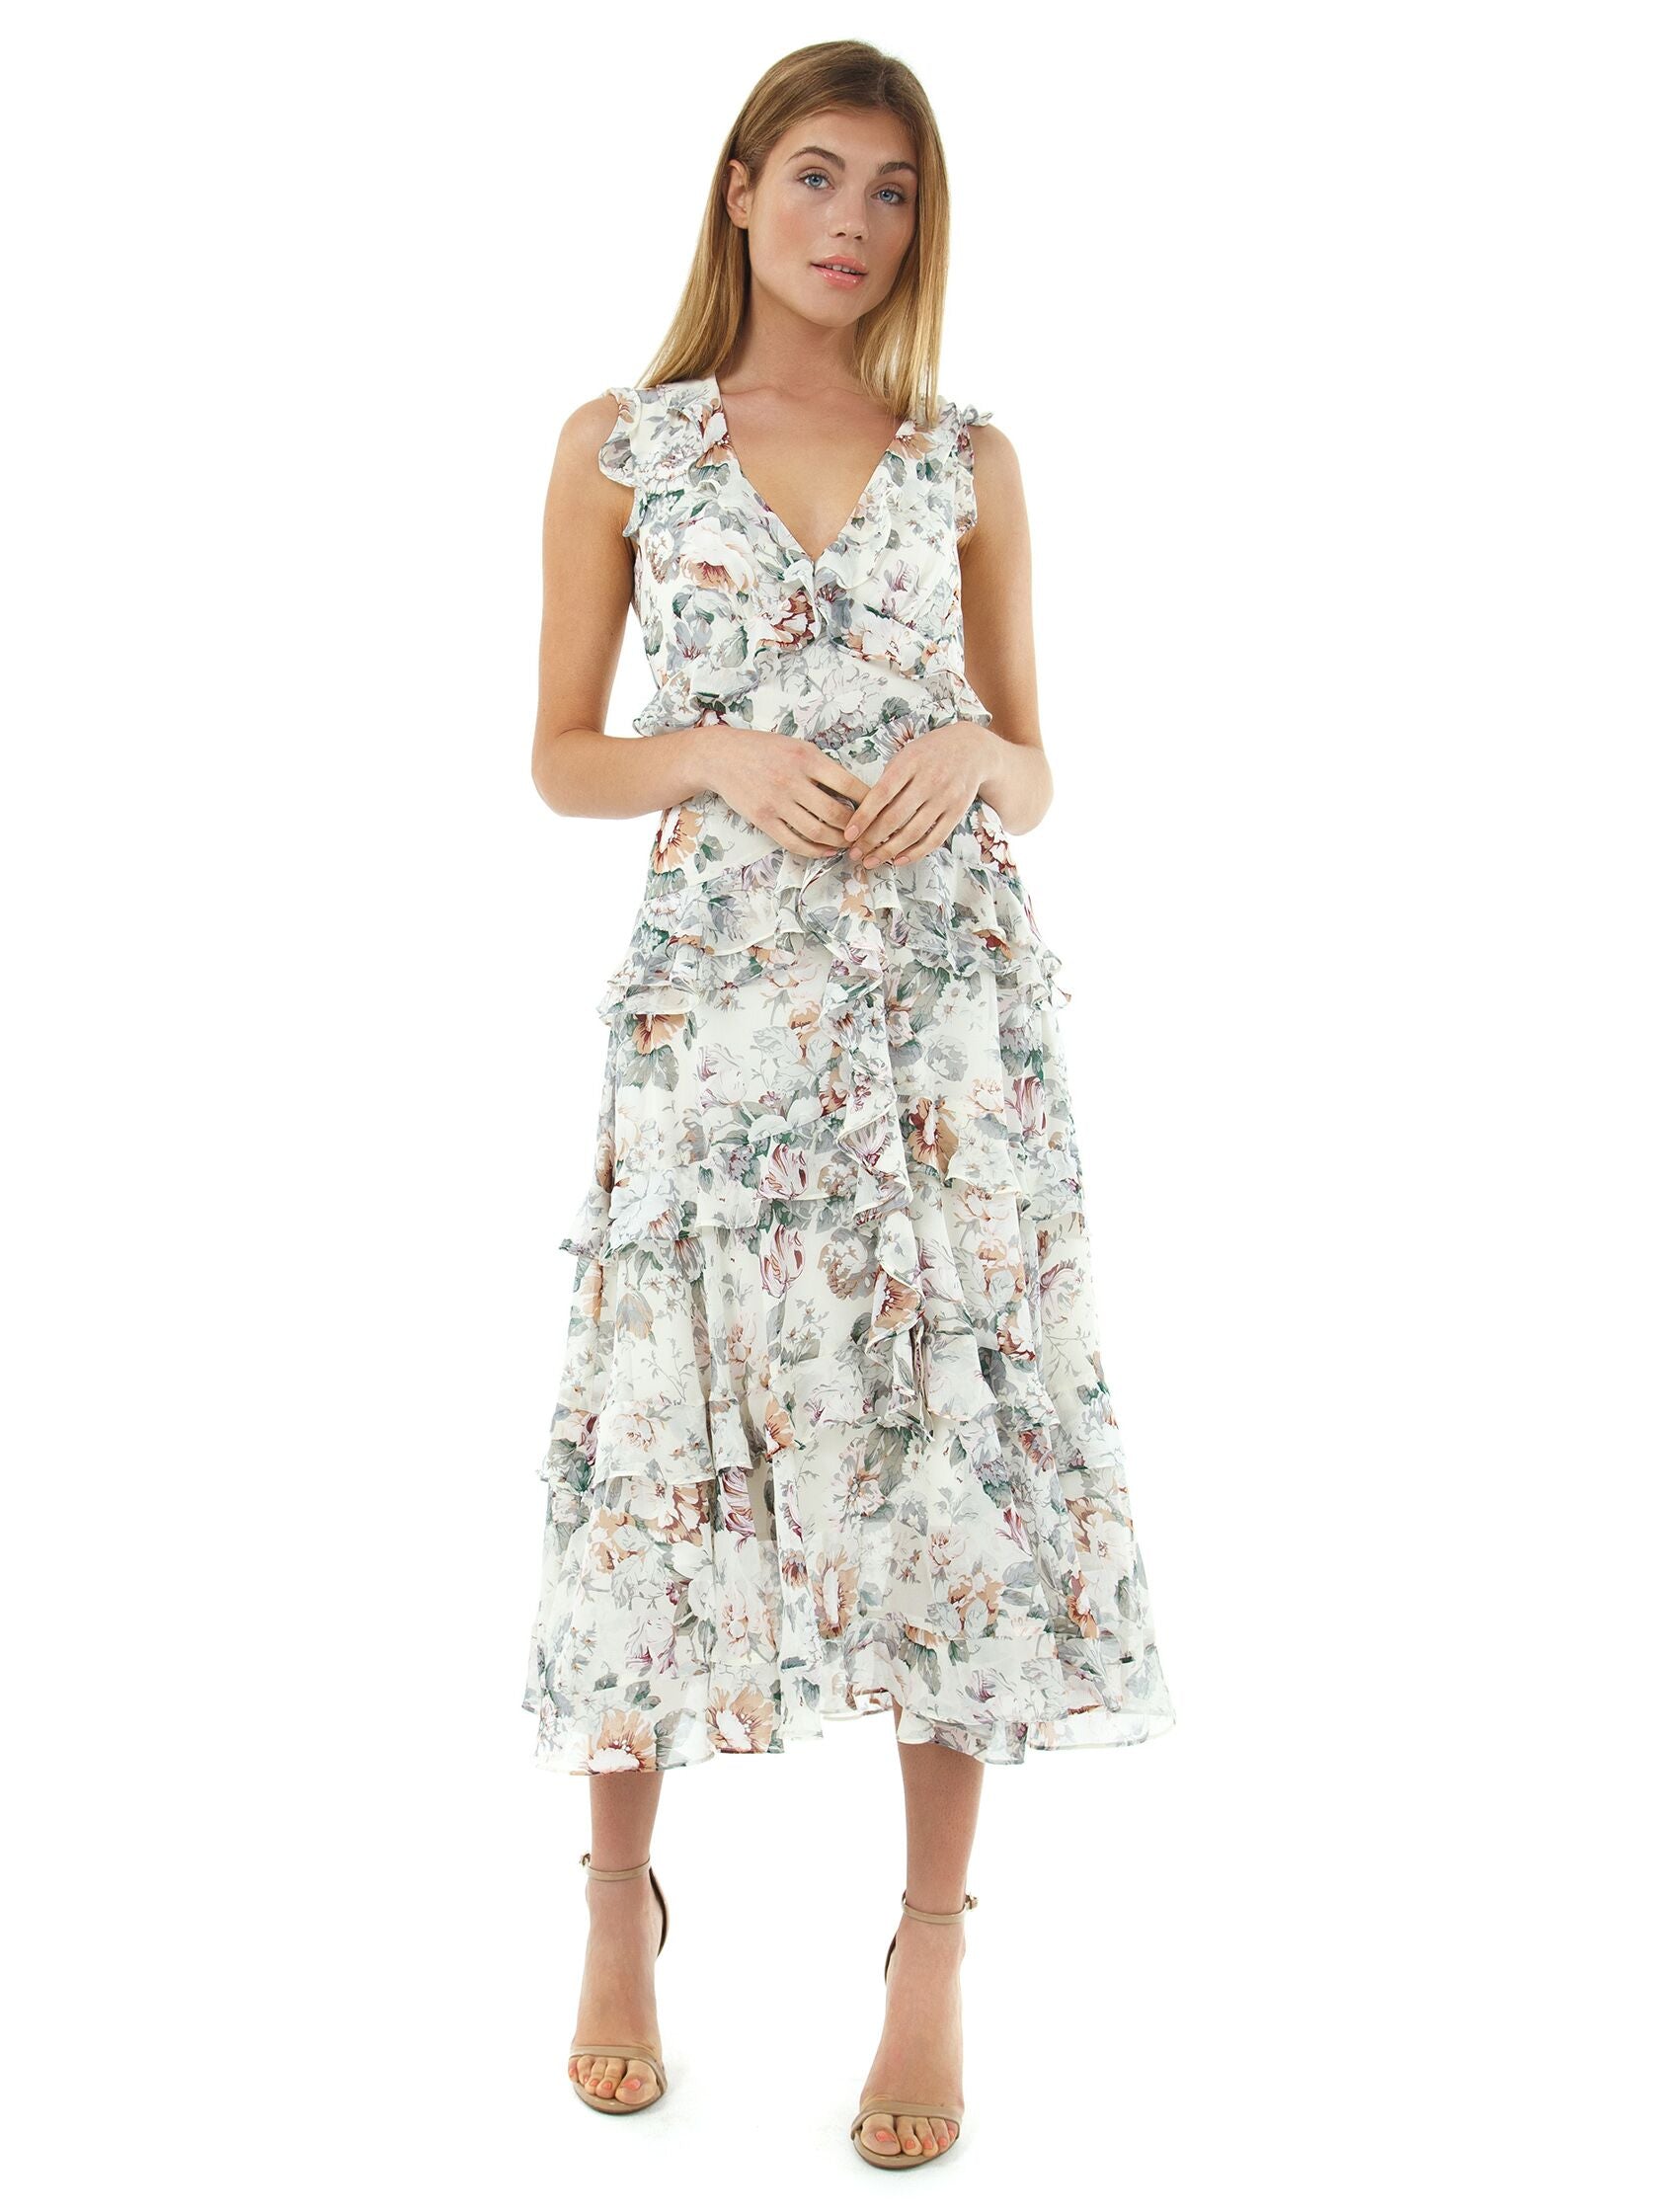 floral outfit female